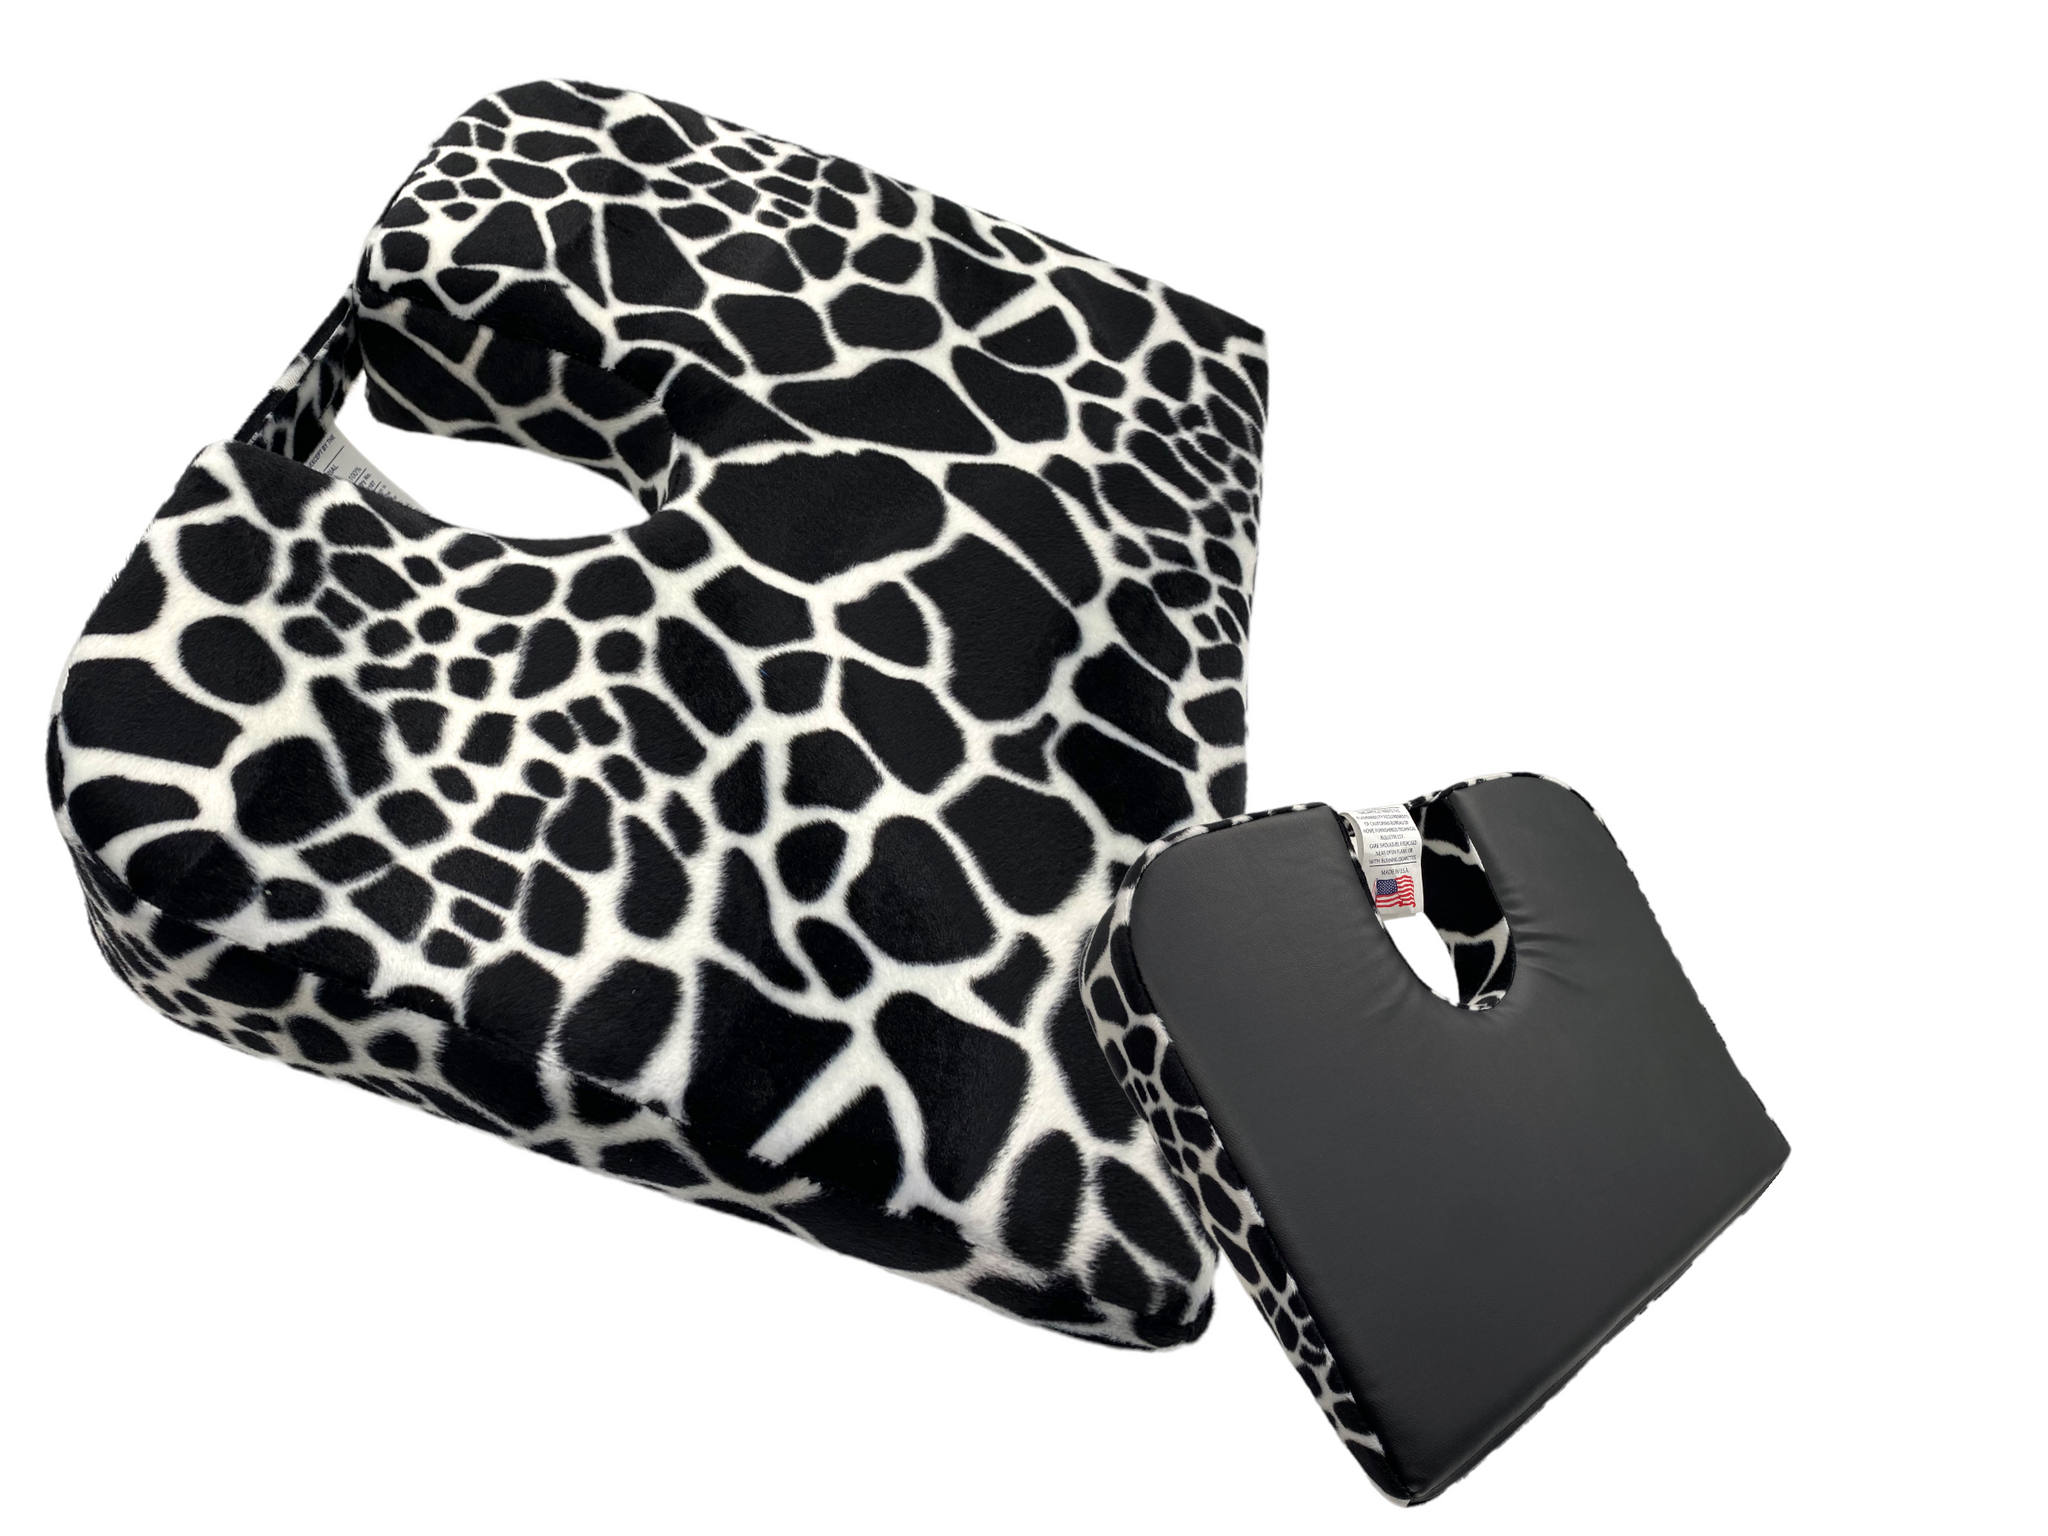 Compact Car Cush 13 x 15 With Extra Firm Foam 13 x 15 relieves and  prevents lower back, pelvic, leg, lumbar pain from sitting.